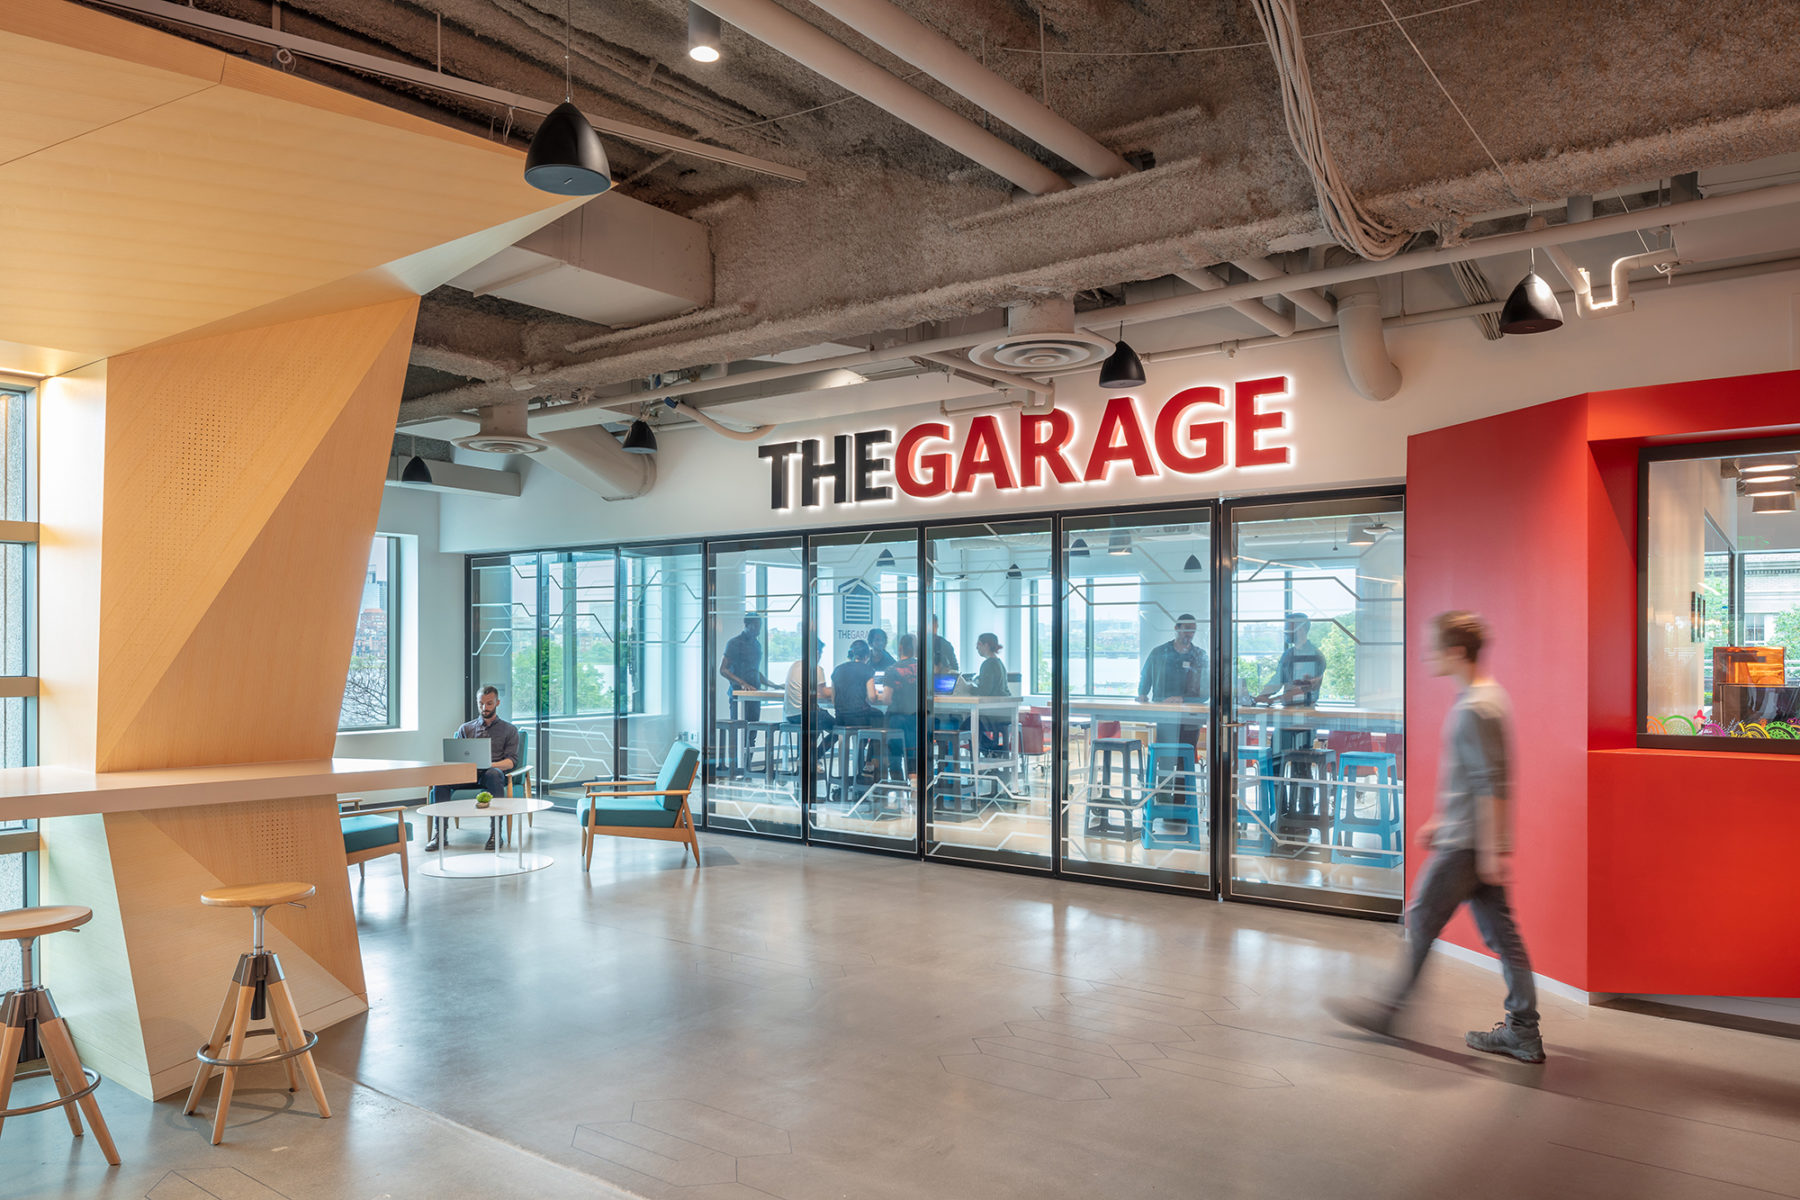 The Garage maker space